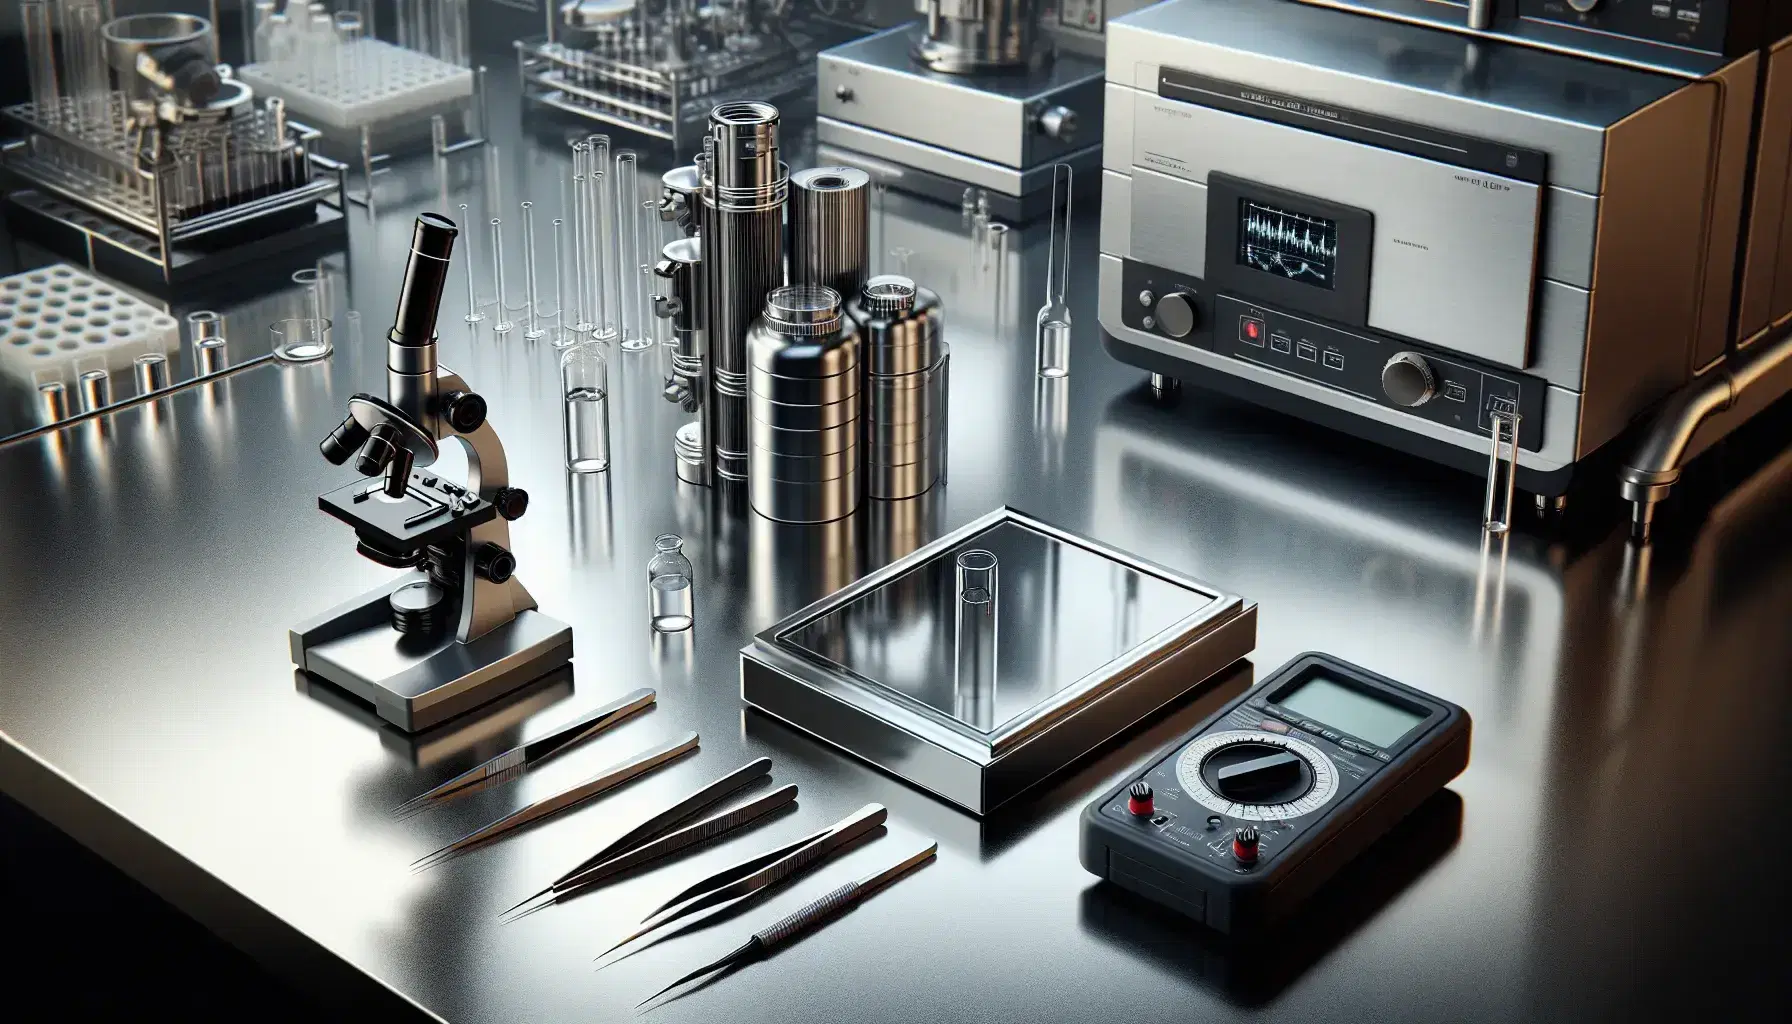 Well-organized laboratory with a microscope, tweezers, a vial, a cryogenic storage container, and a digital multimeter on a metallic table, with complex machinery in the background.